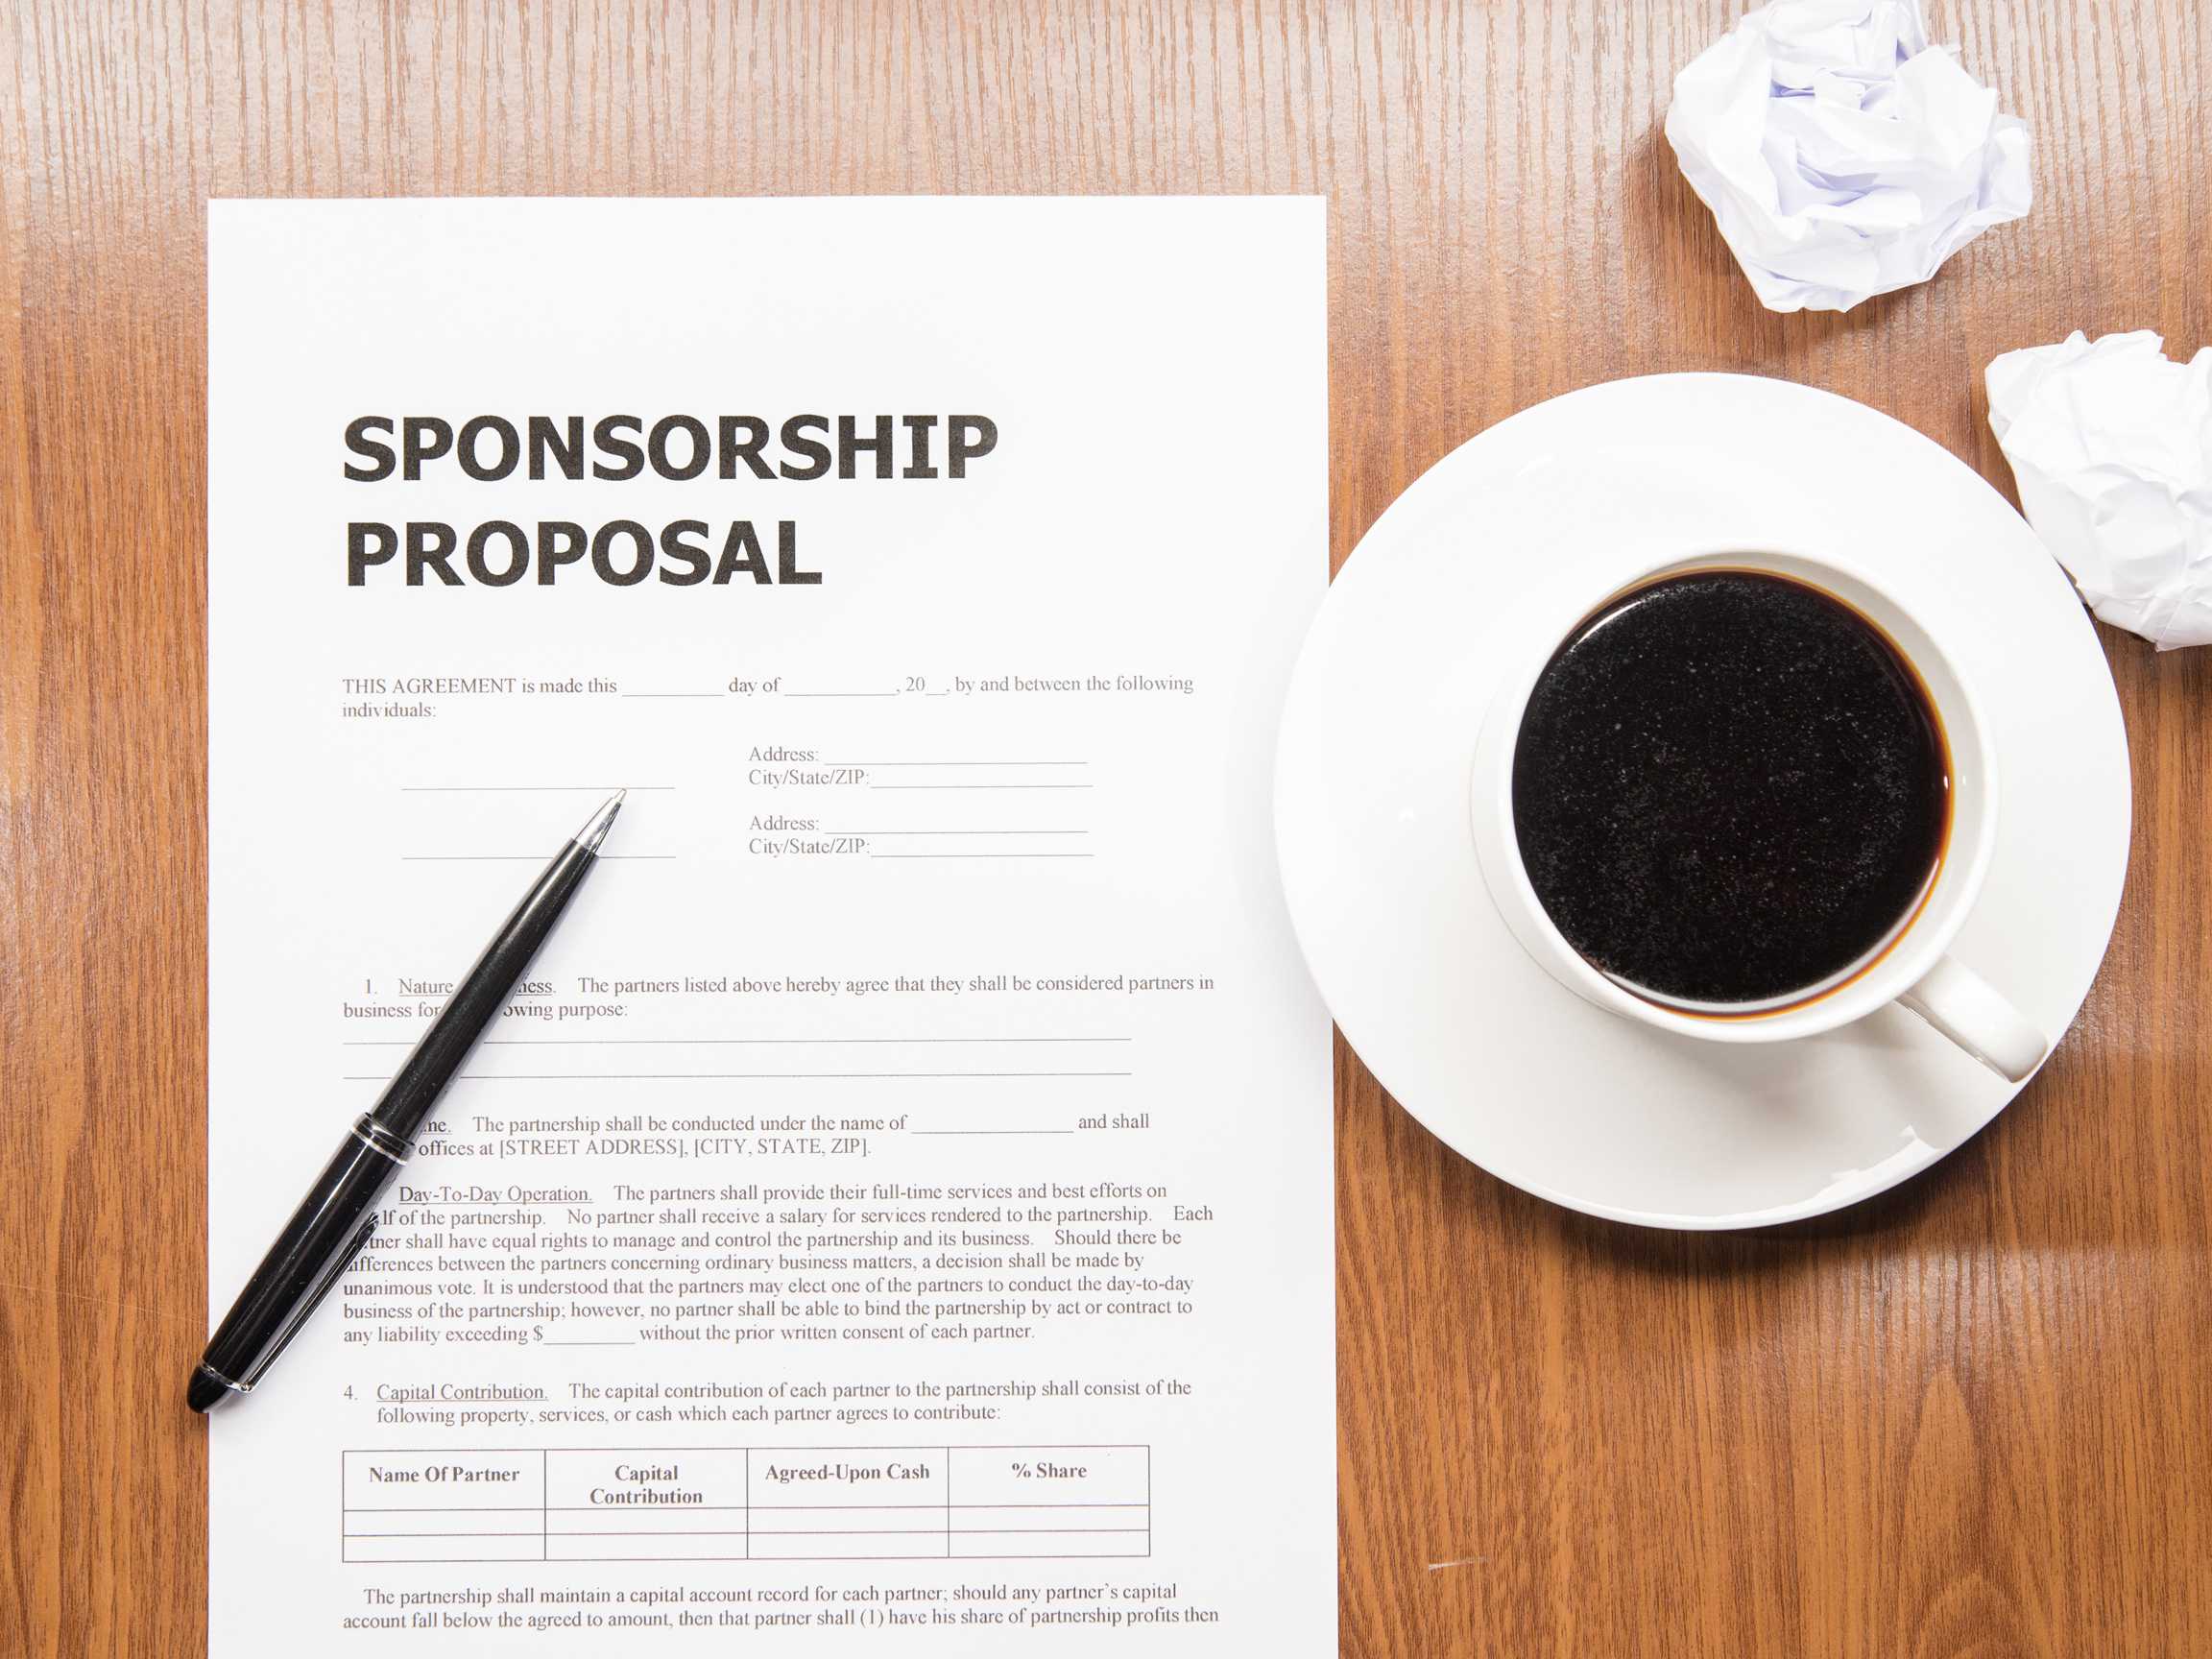 5 Tips for Landing Corporate Sponsorship with Roberto Candelaria